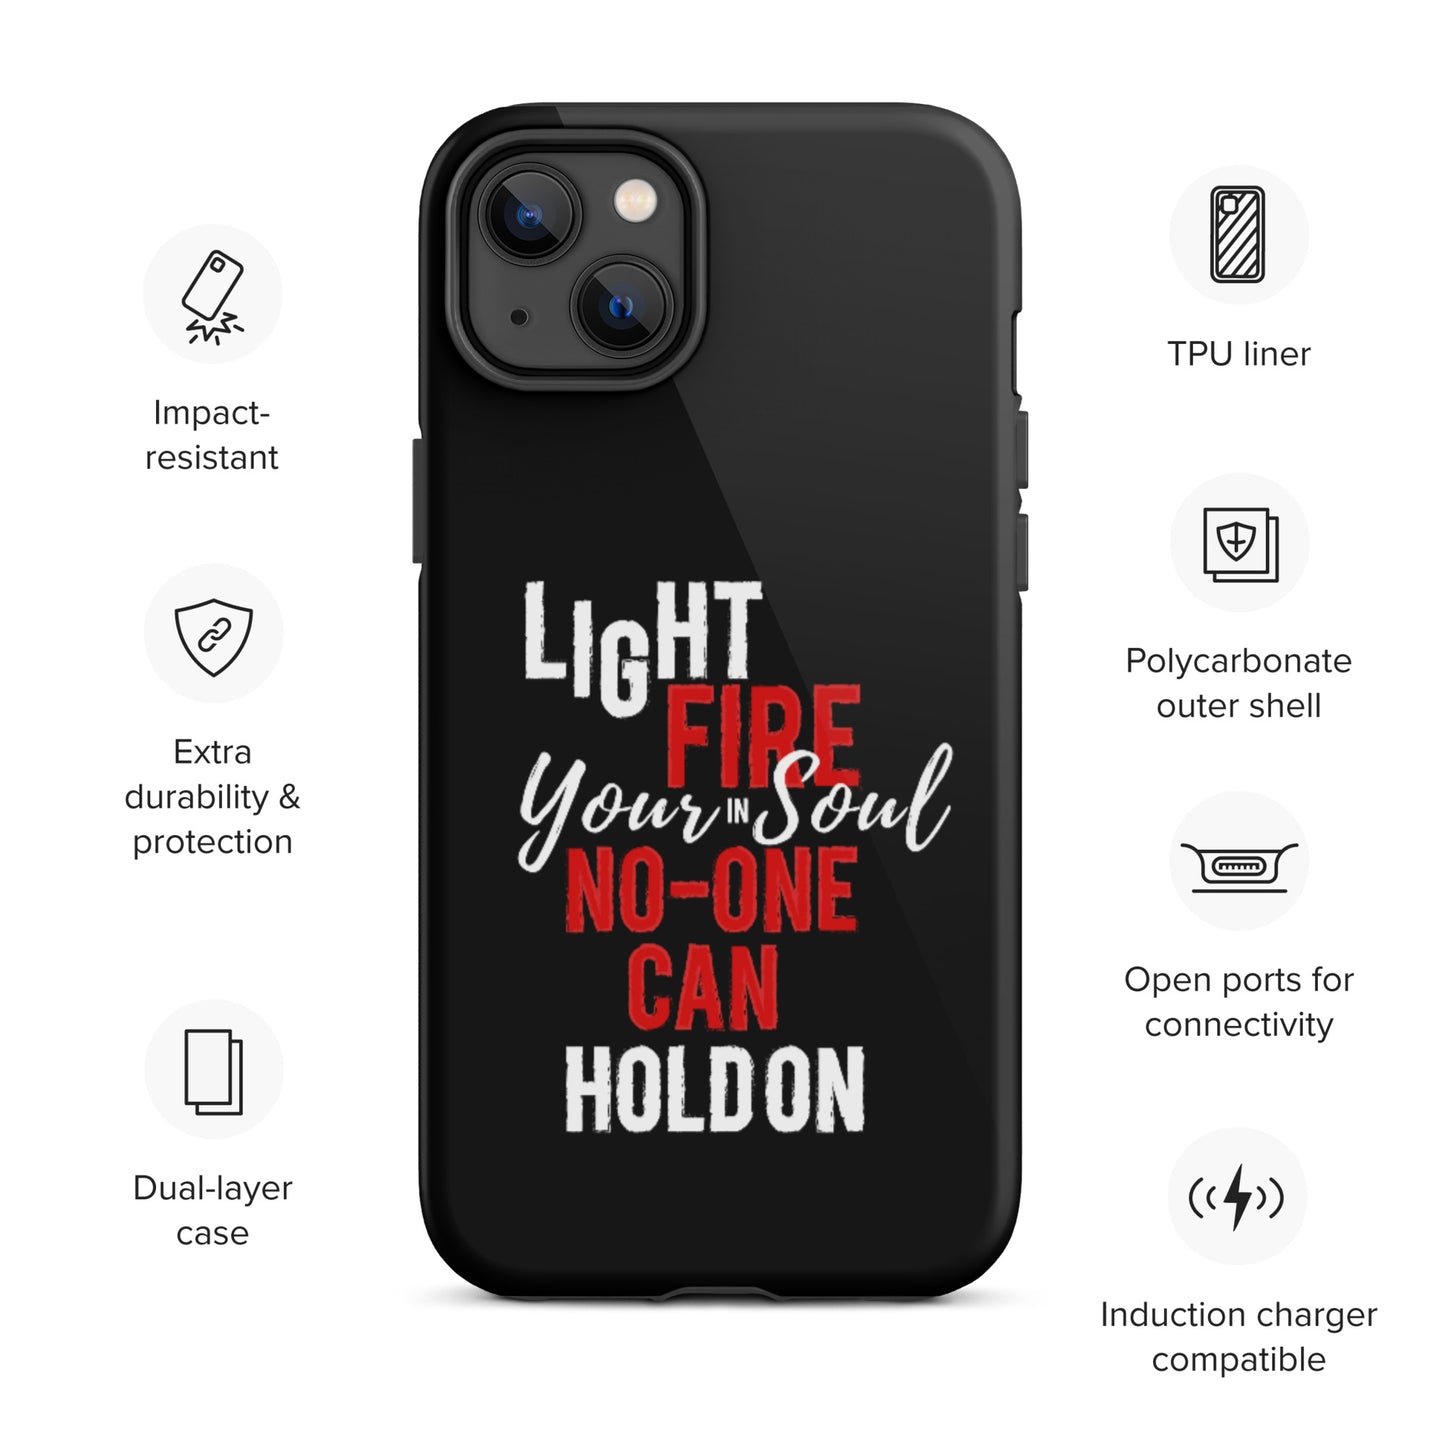 Tough iPhone case Light Fire In Your Soul No One Can Hold ON